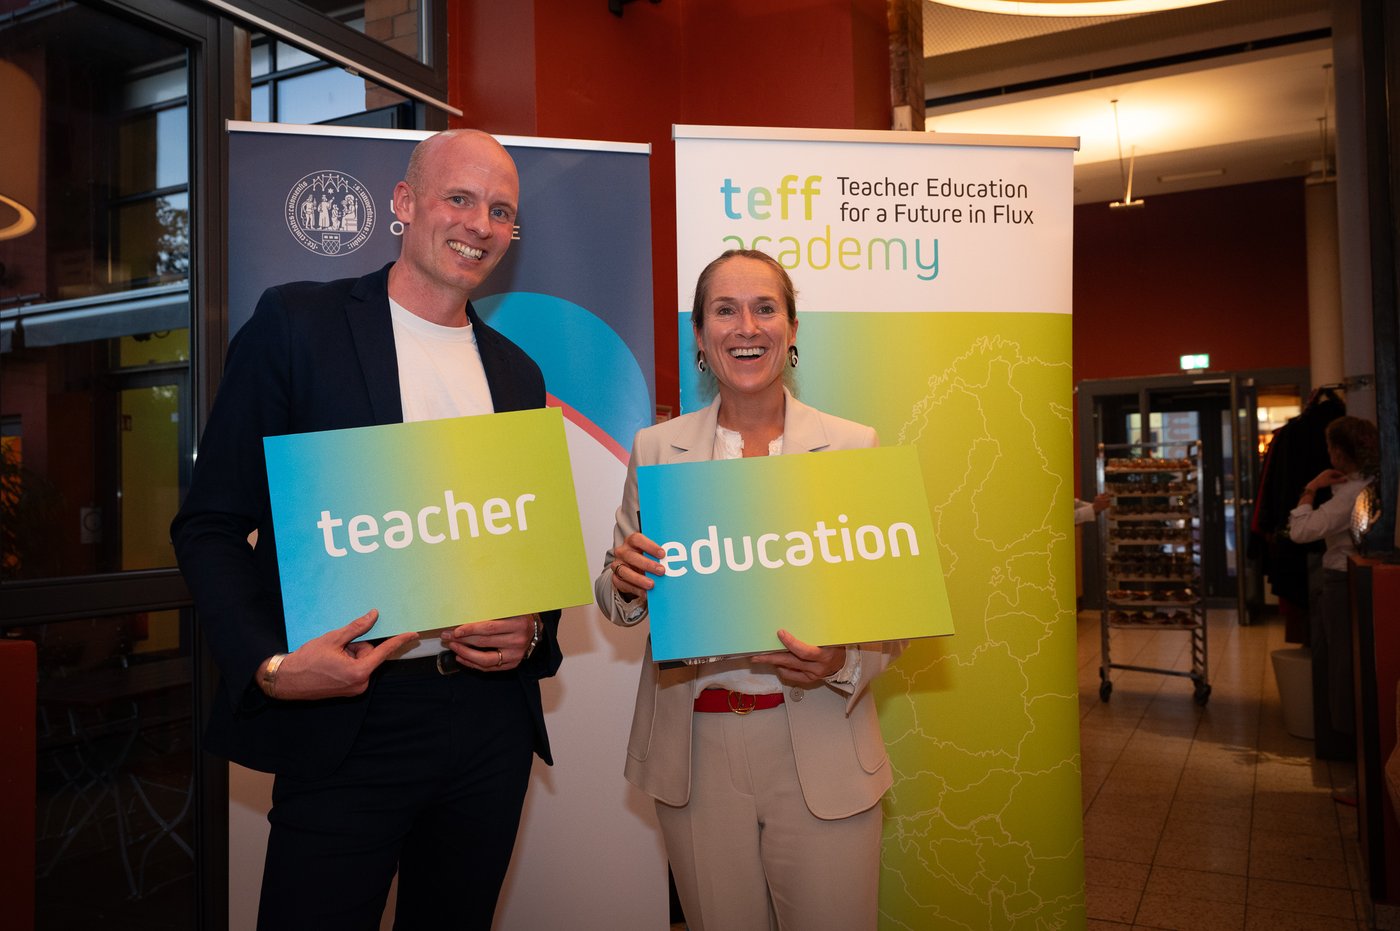 Two people holding signs with the words "teacher" and "education", suggesting a focus on educational themes or initiatives.